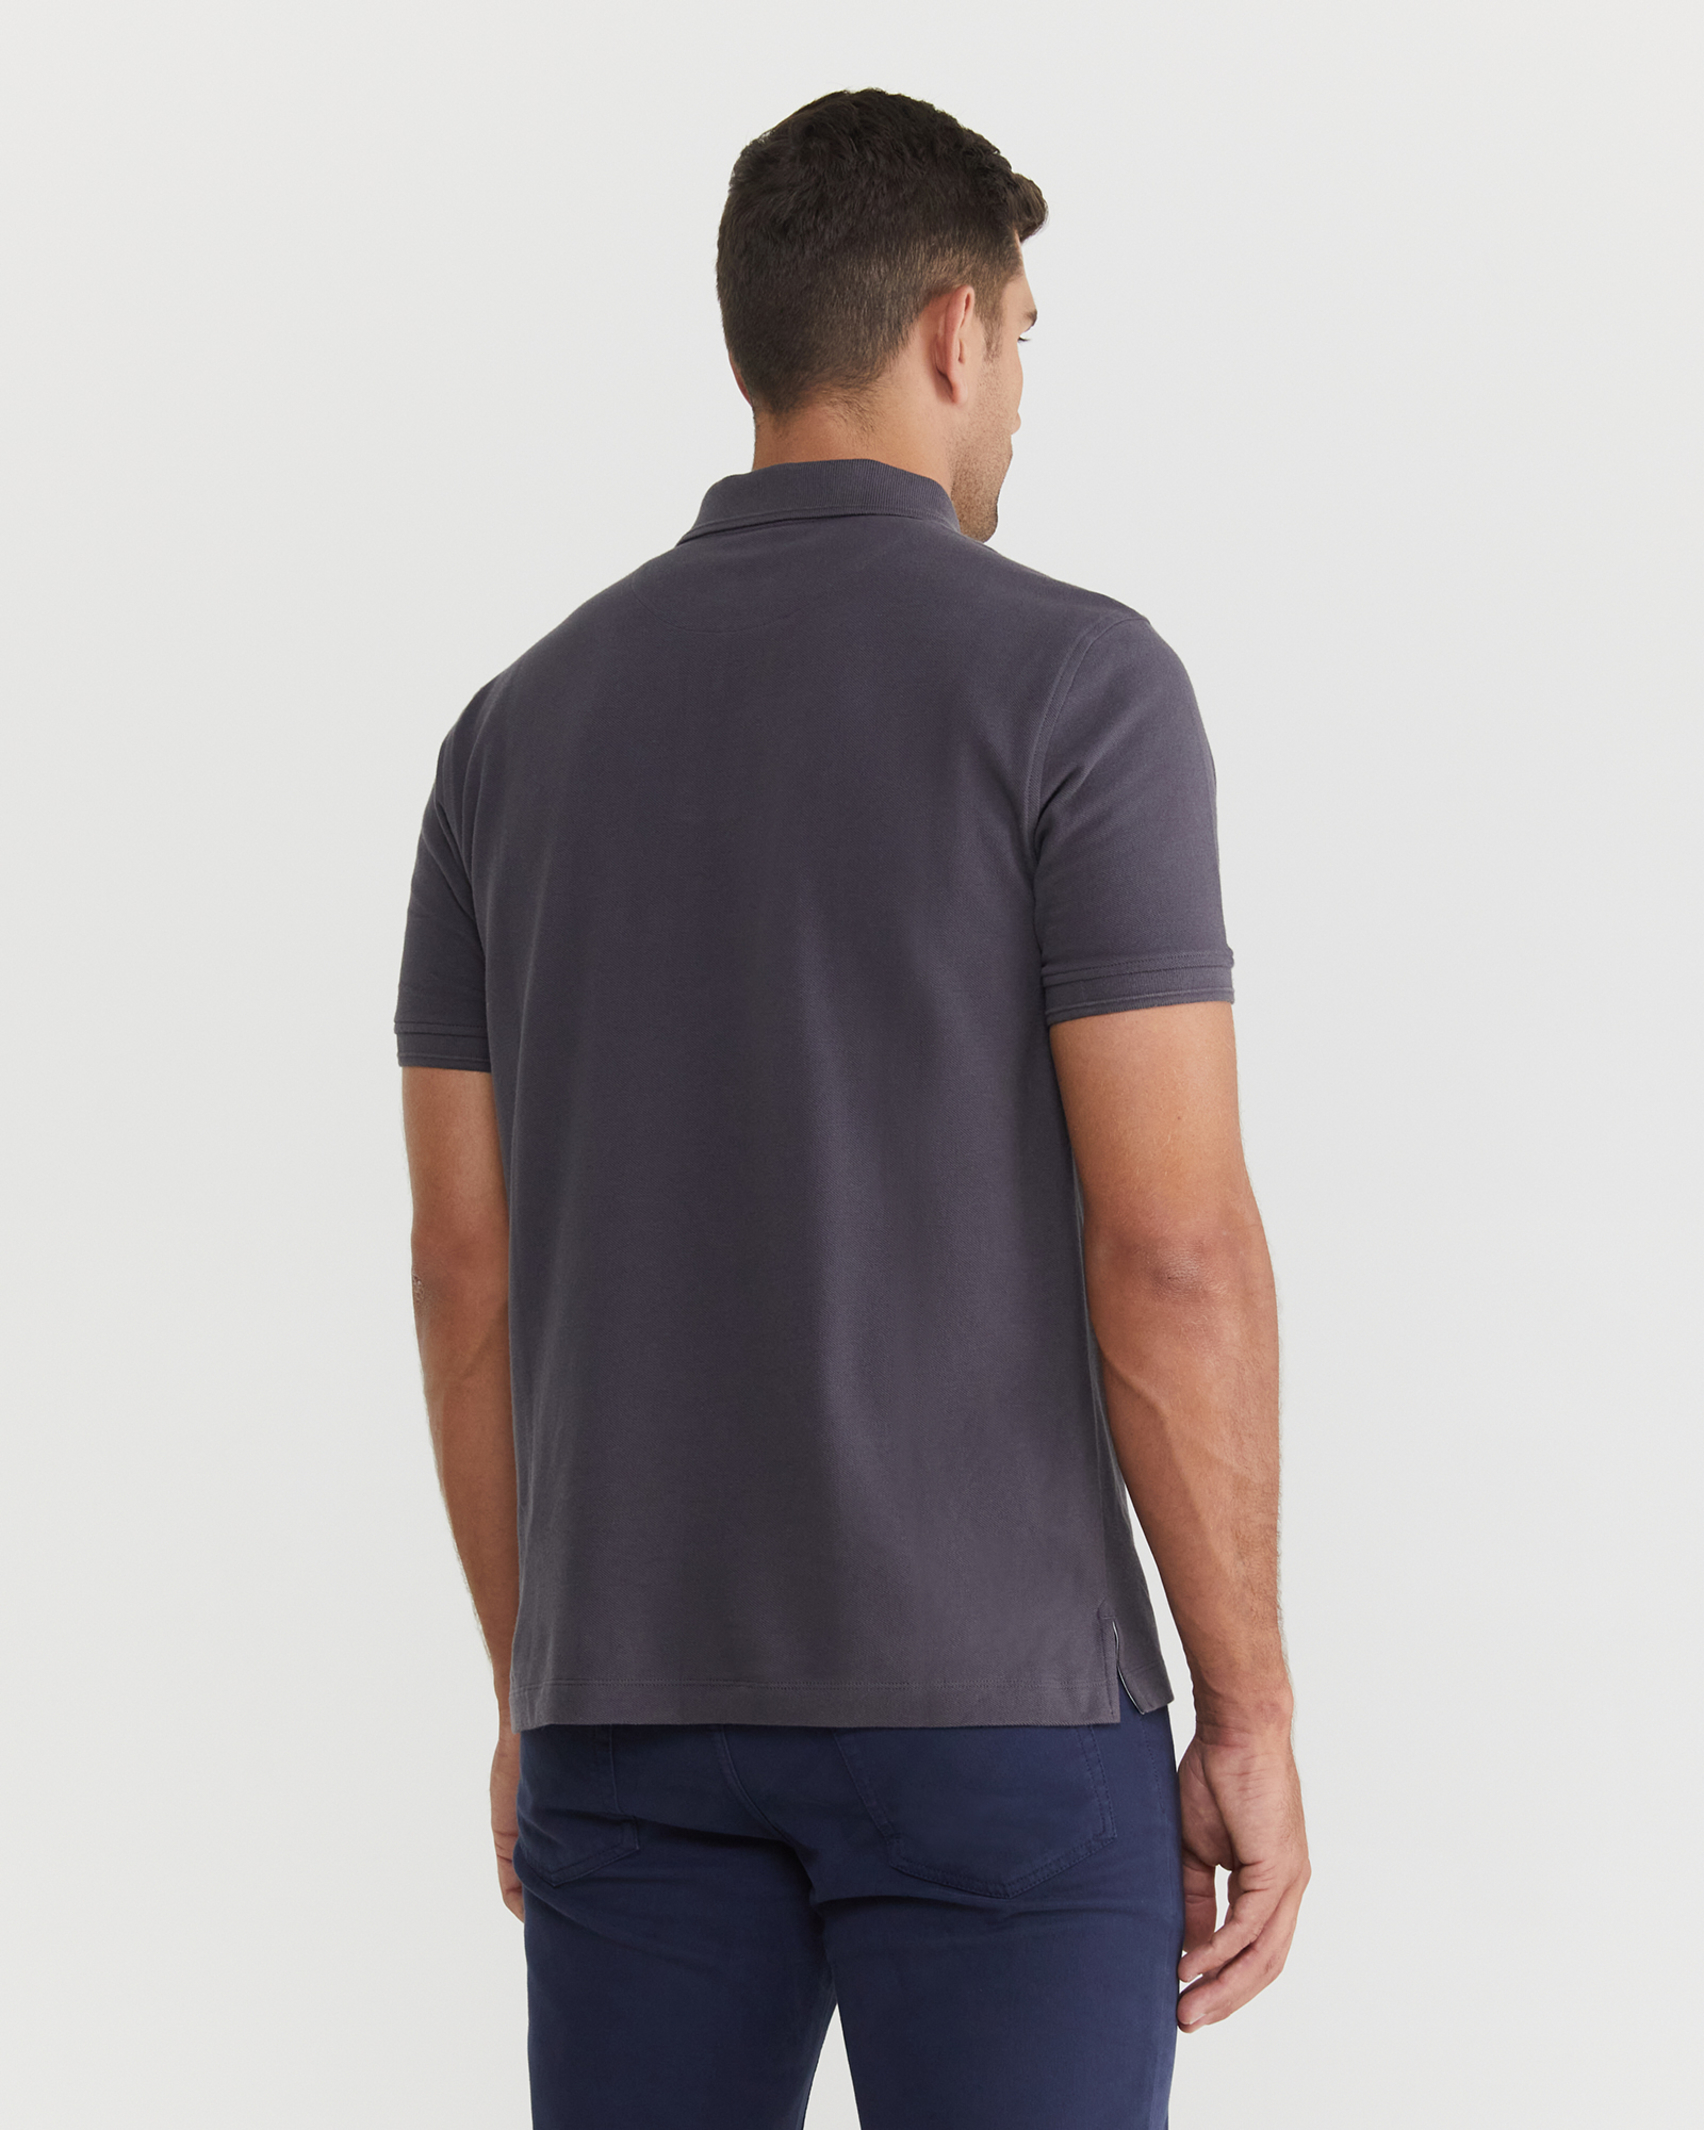 Pique Polo in CHARCOAL